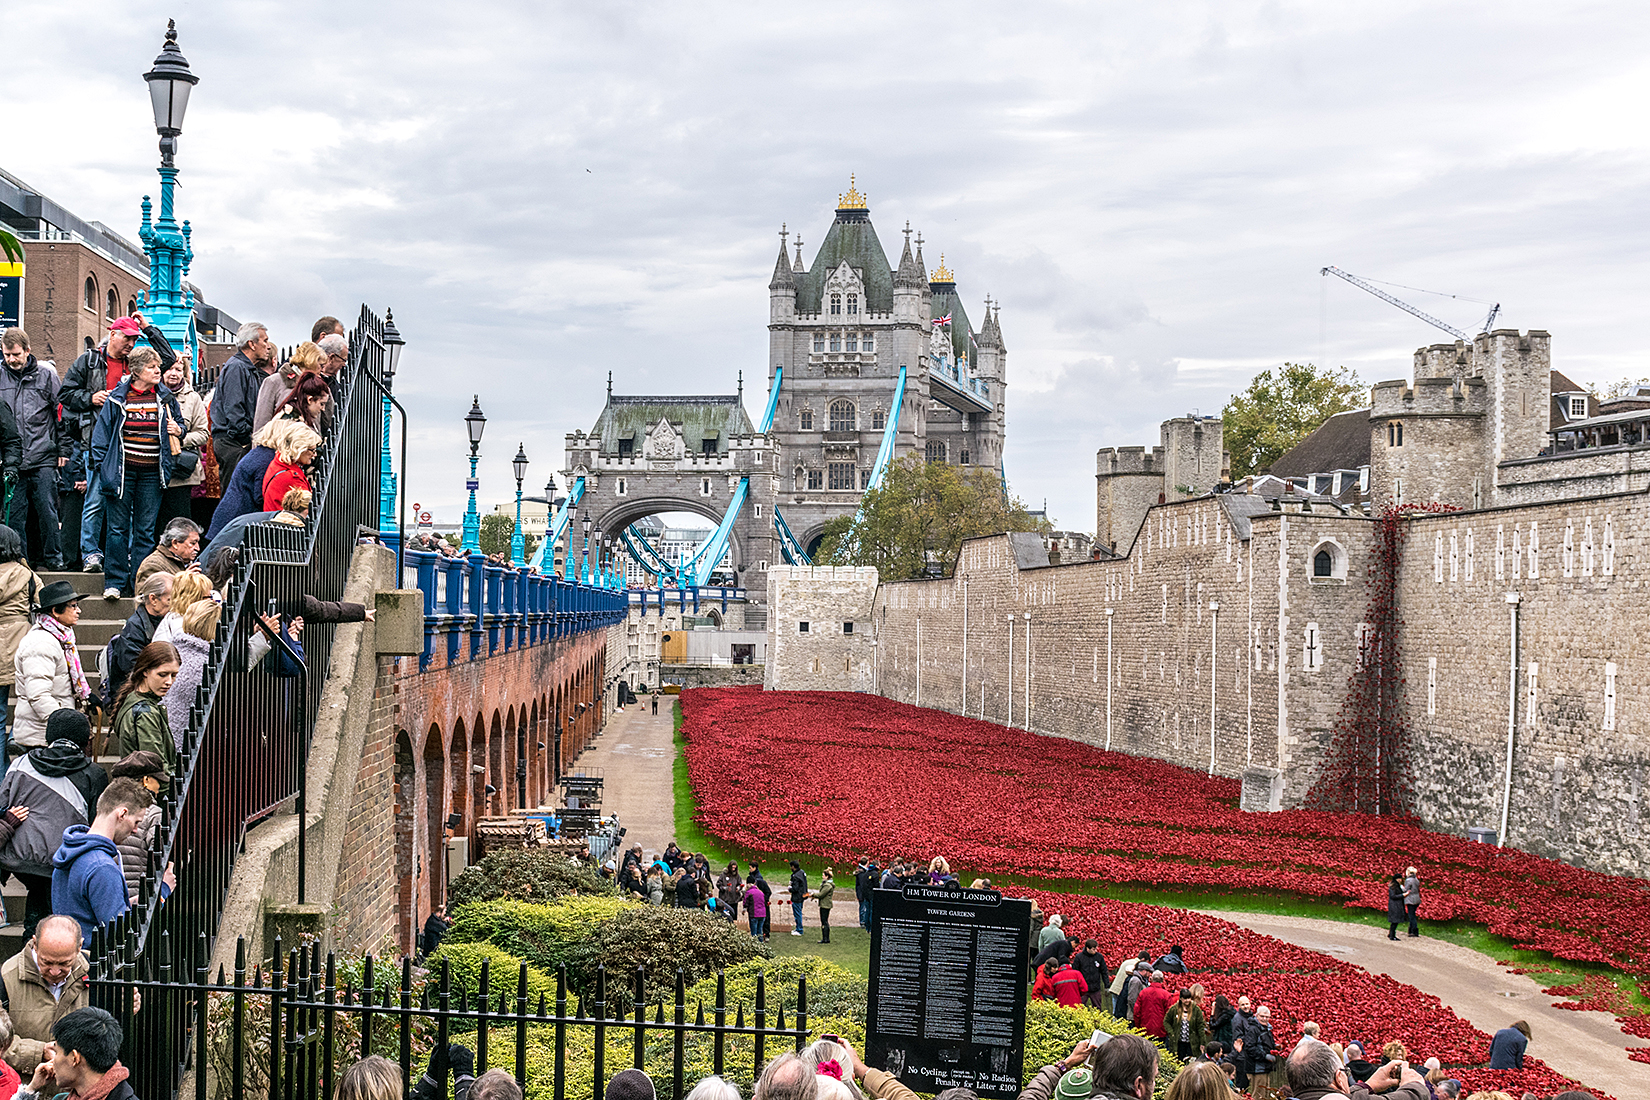 Tower Bridge and the 'Weeping Window' on the east wall